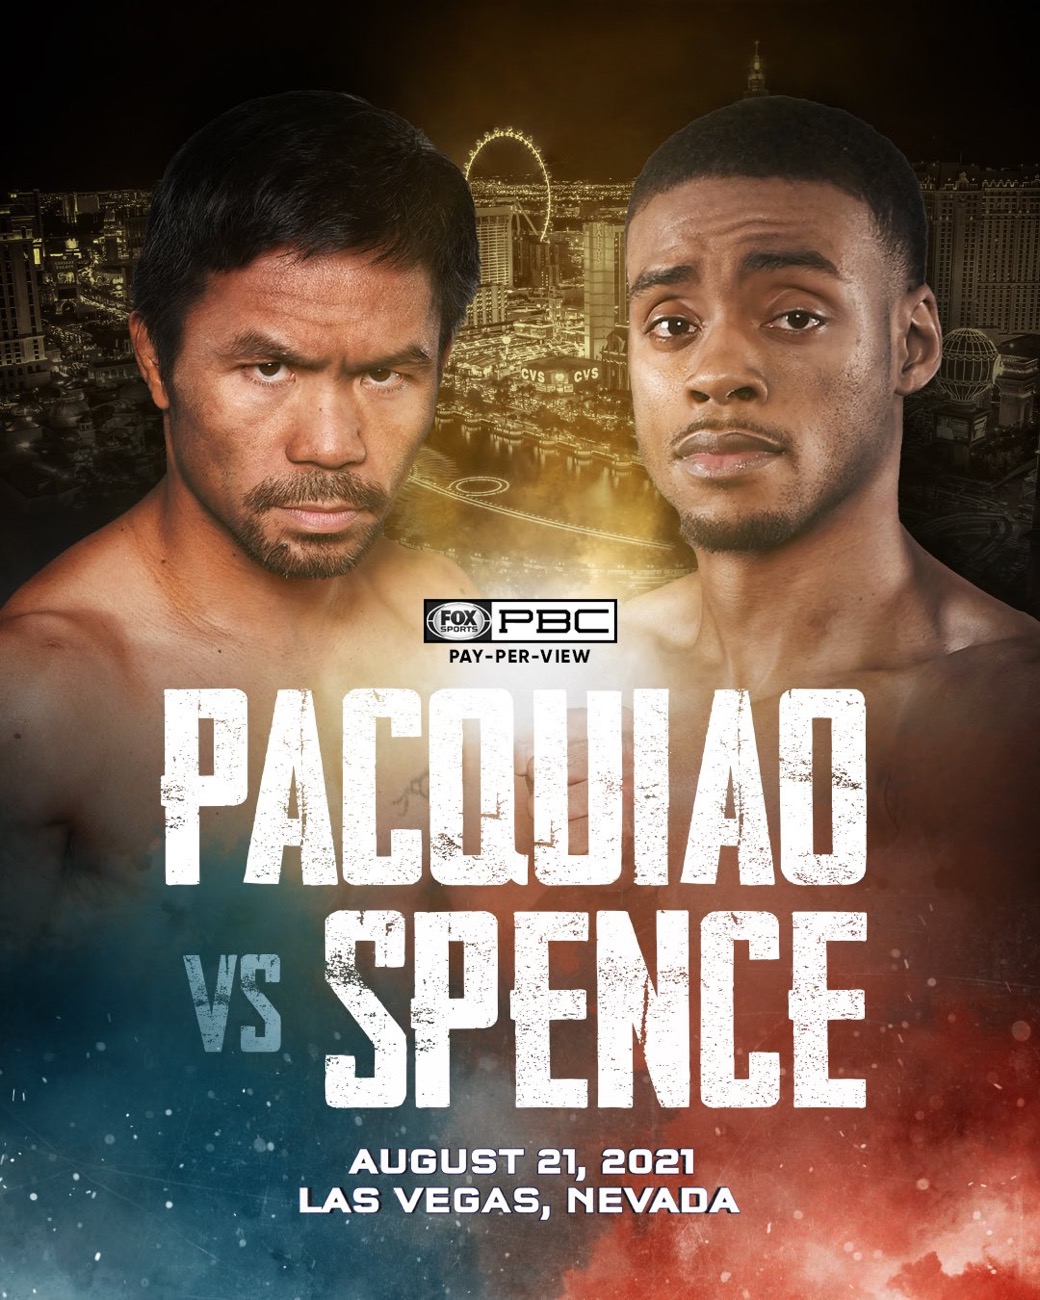 Errol Spence, Manny Pacquiao boxing image / photo